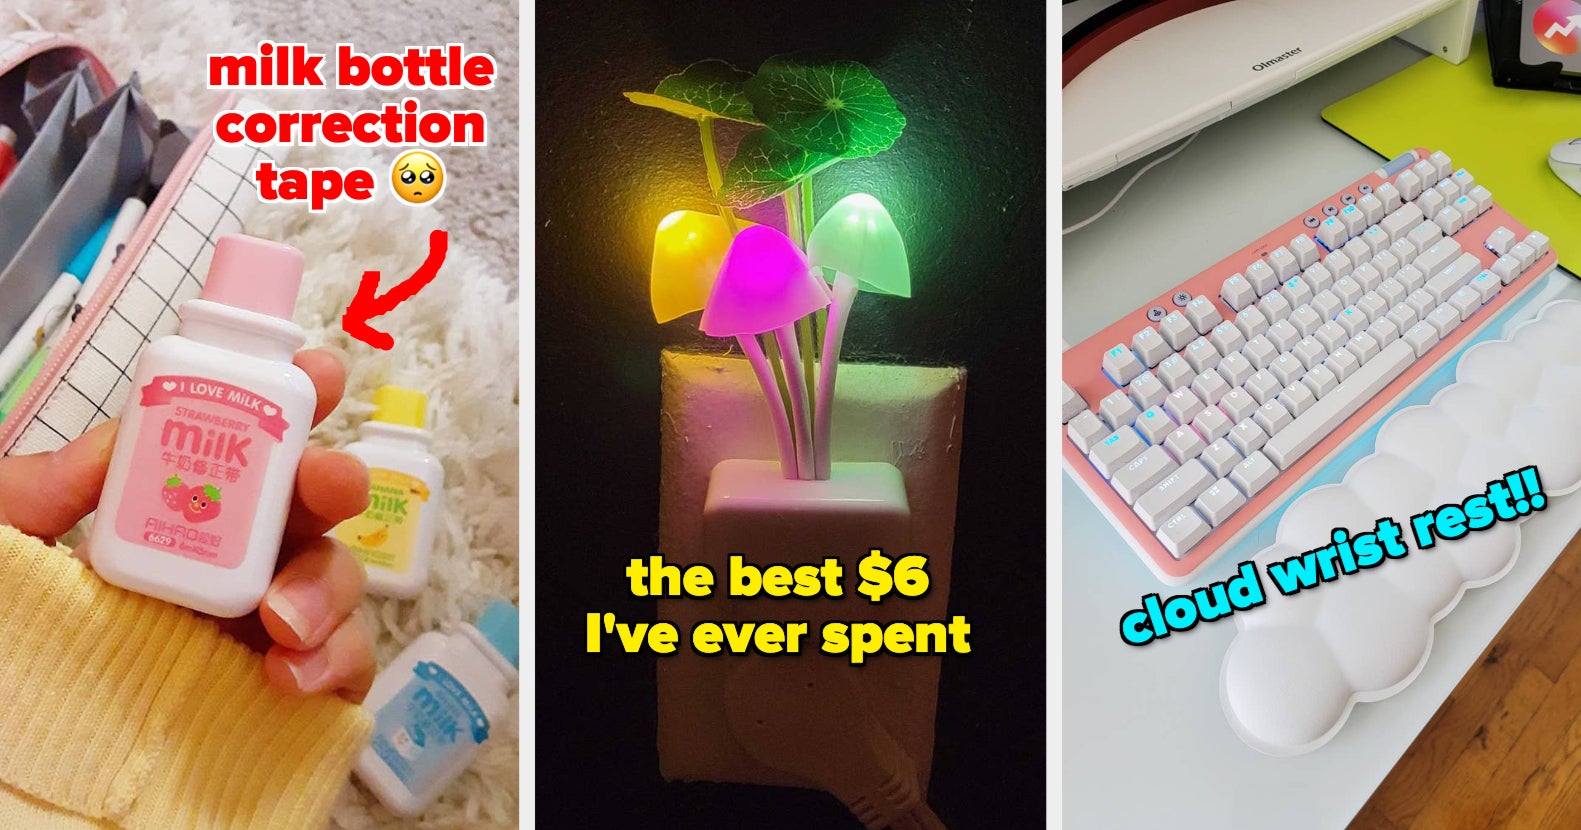 40 Cute Desk Products From TikTok